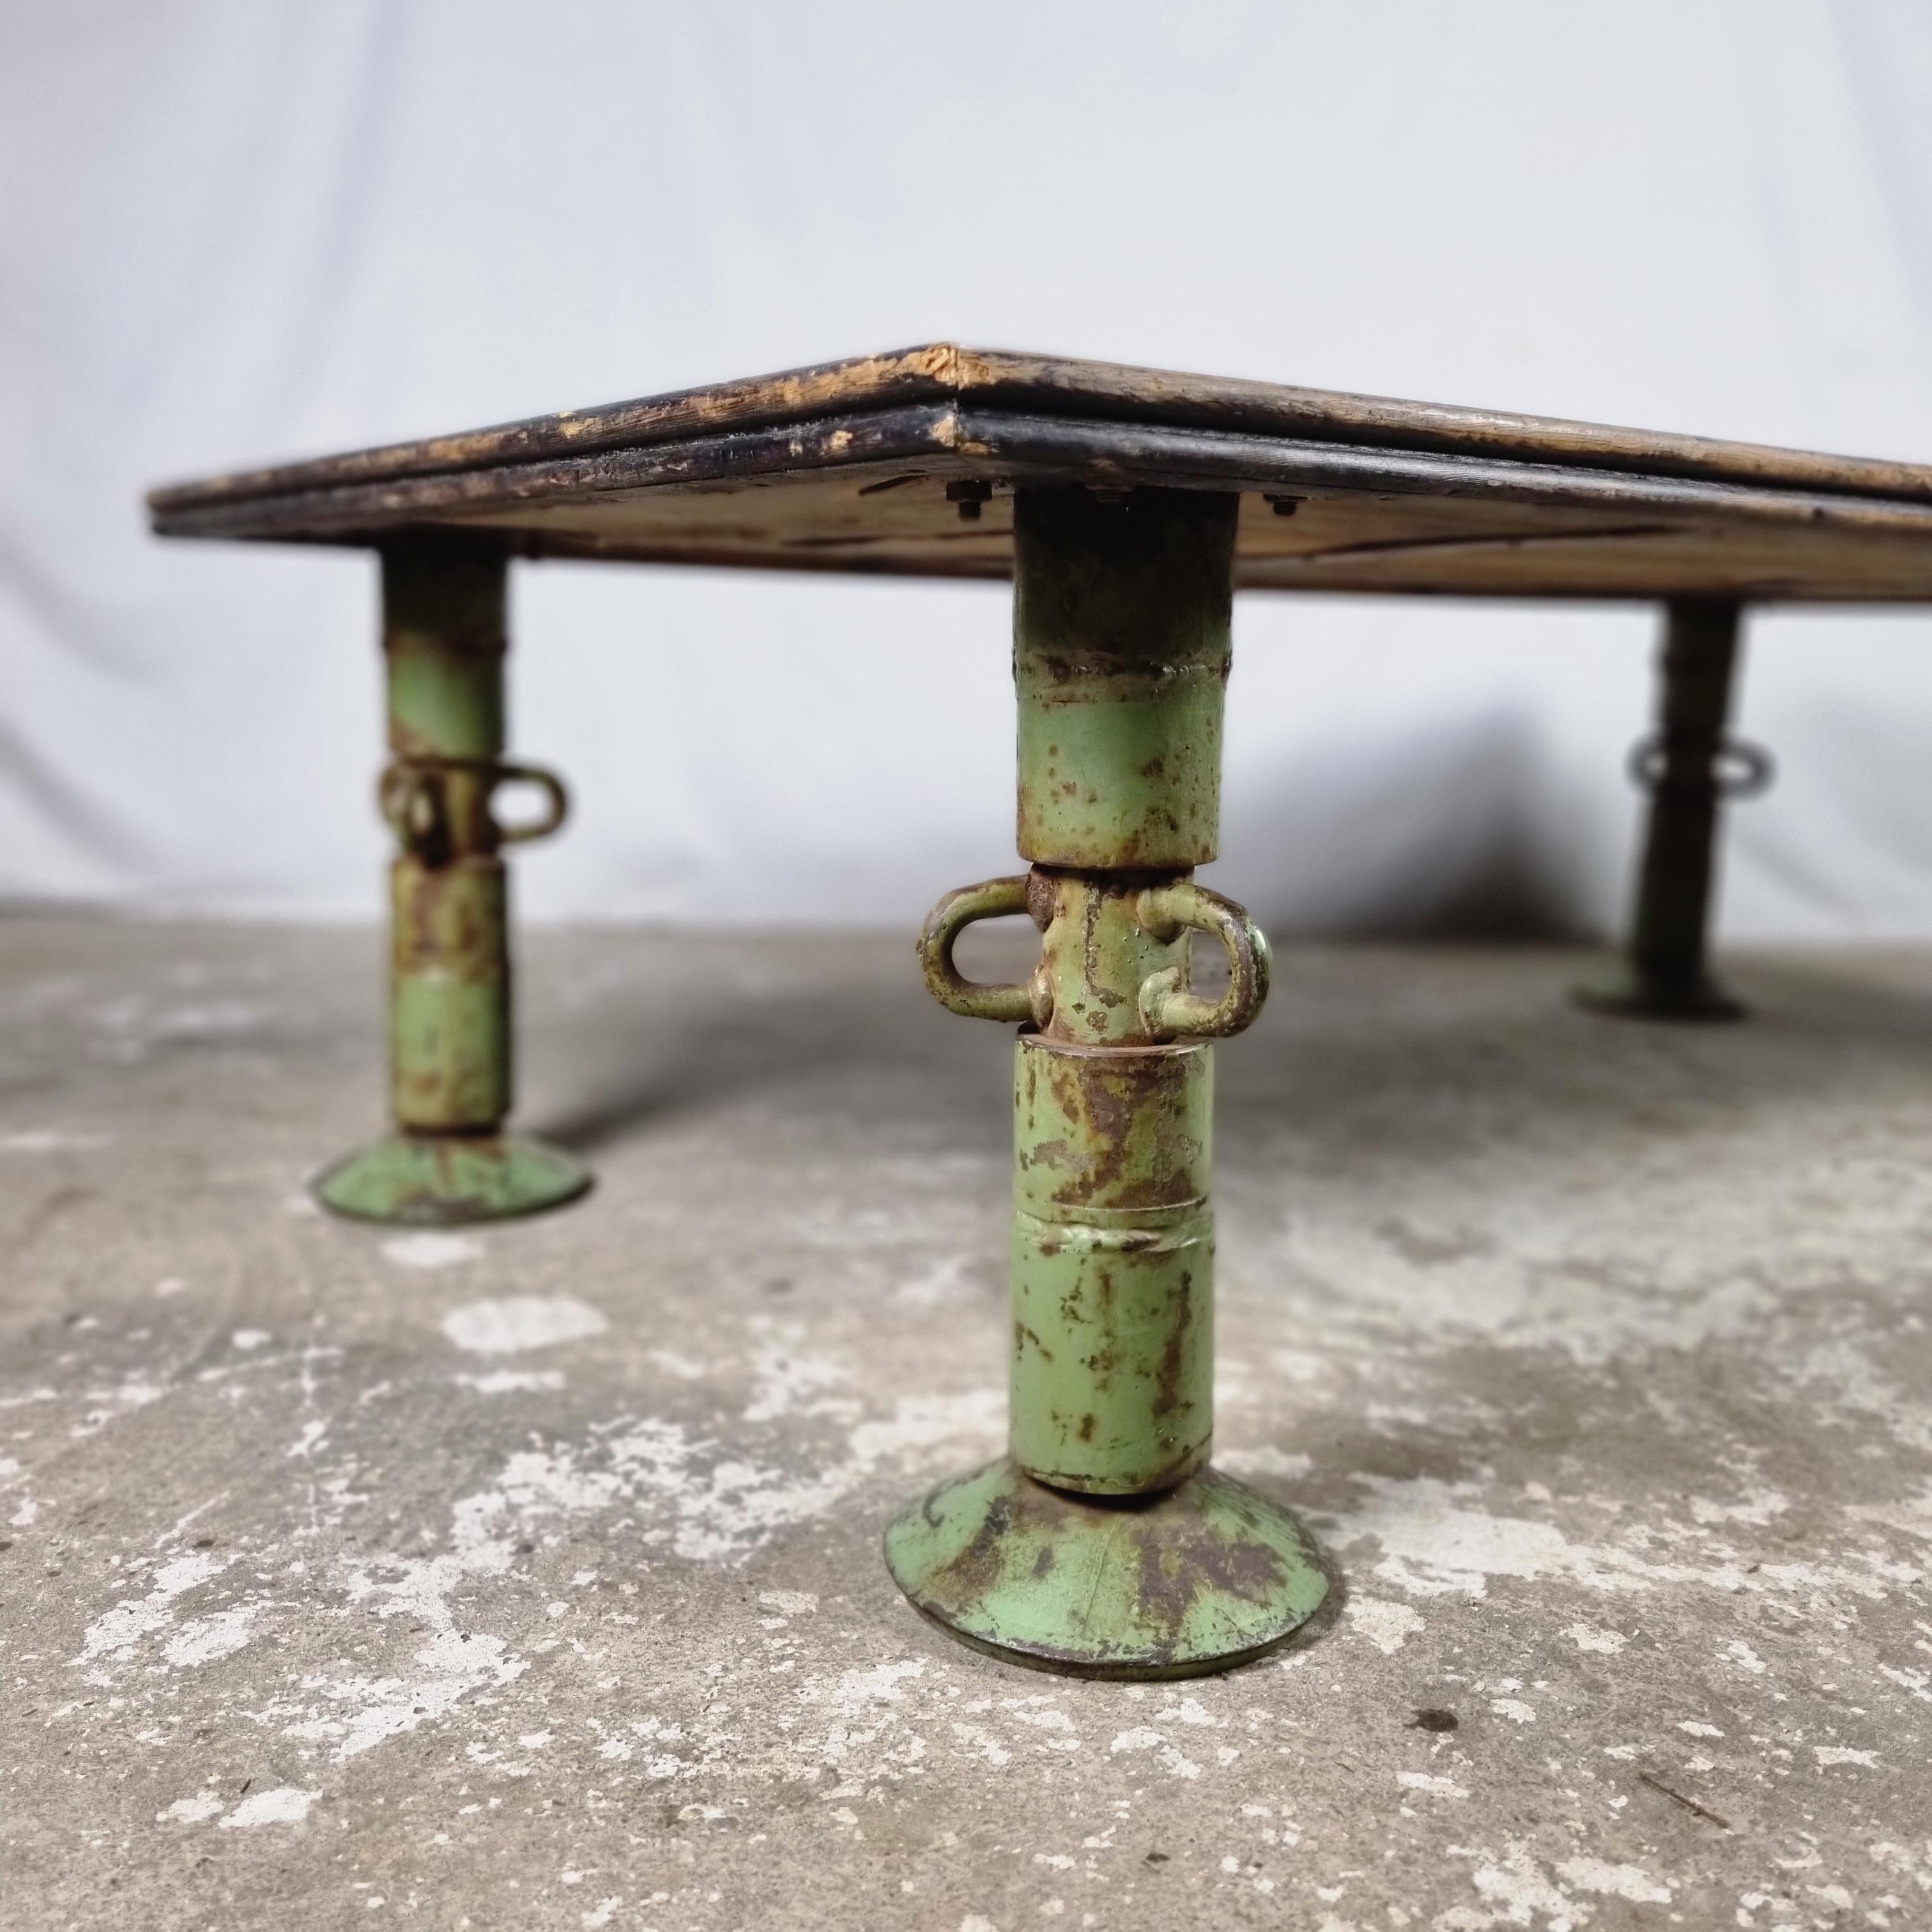 20th Century Large heavy industrial vintage coffee table from reclaimed wood, cast iron legs